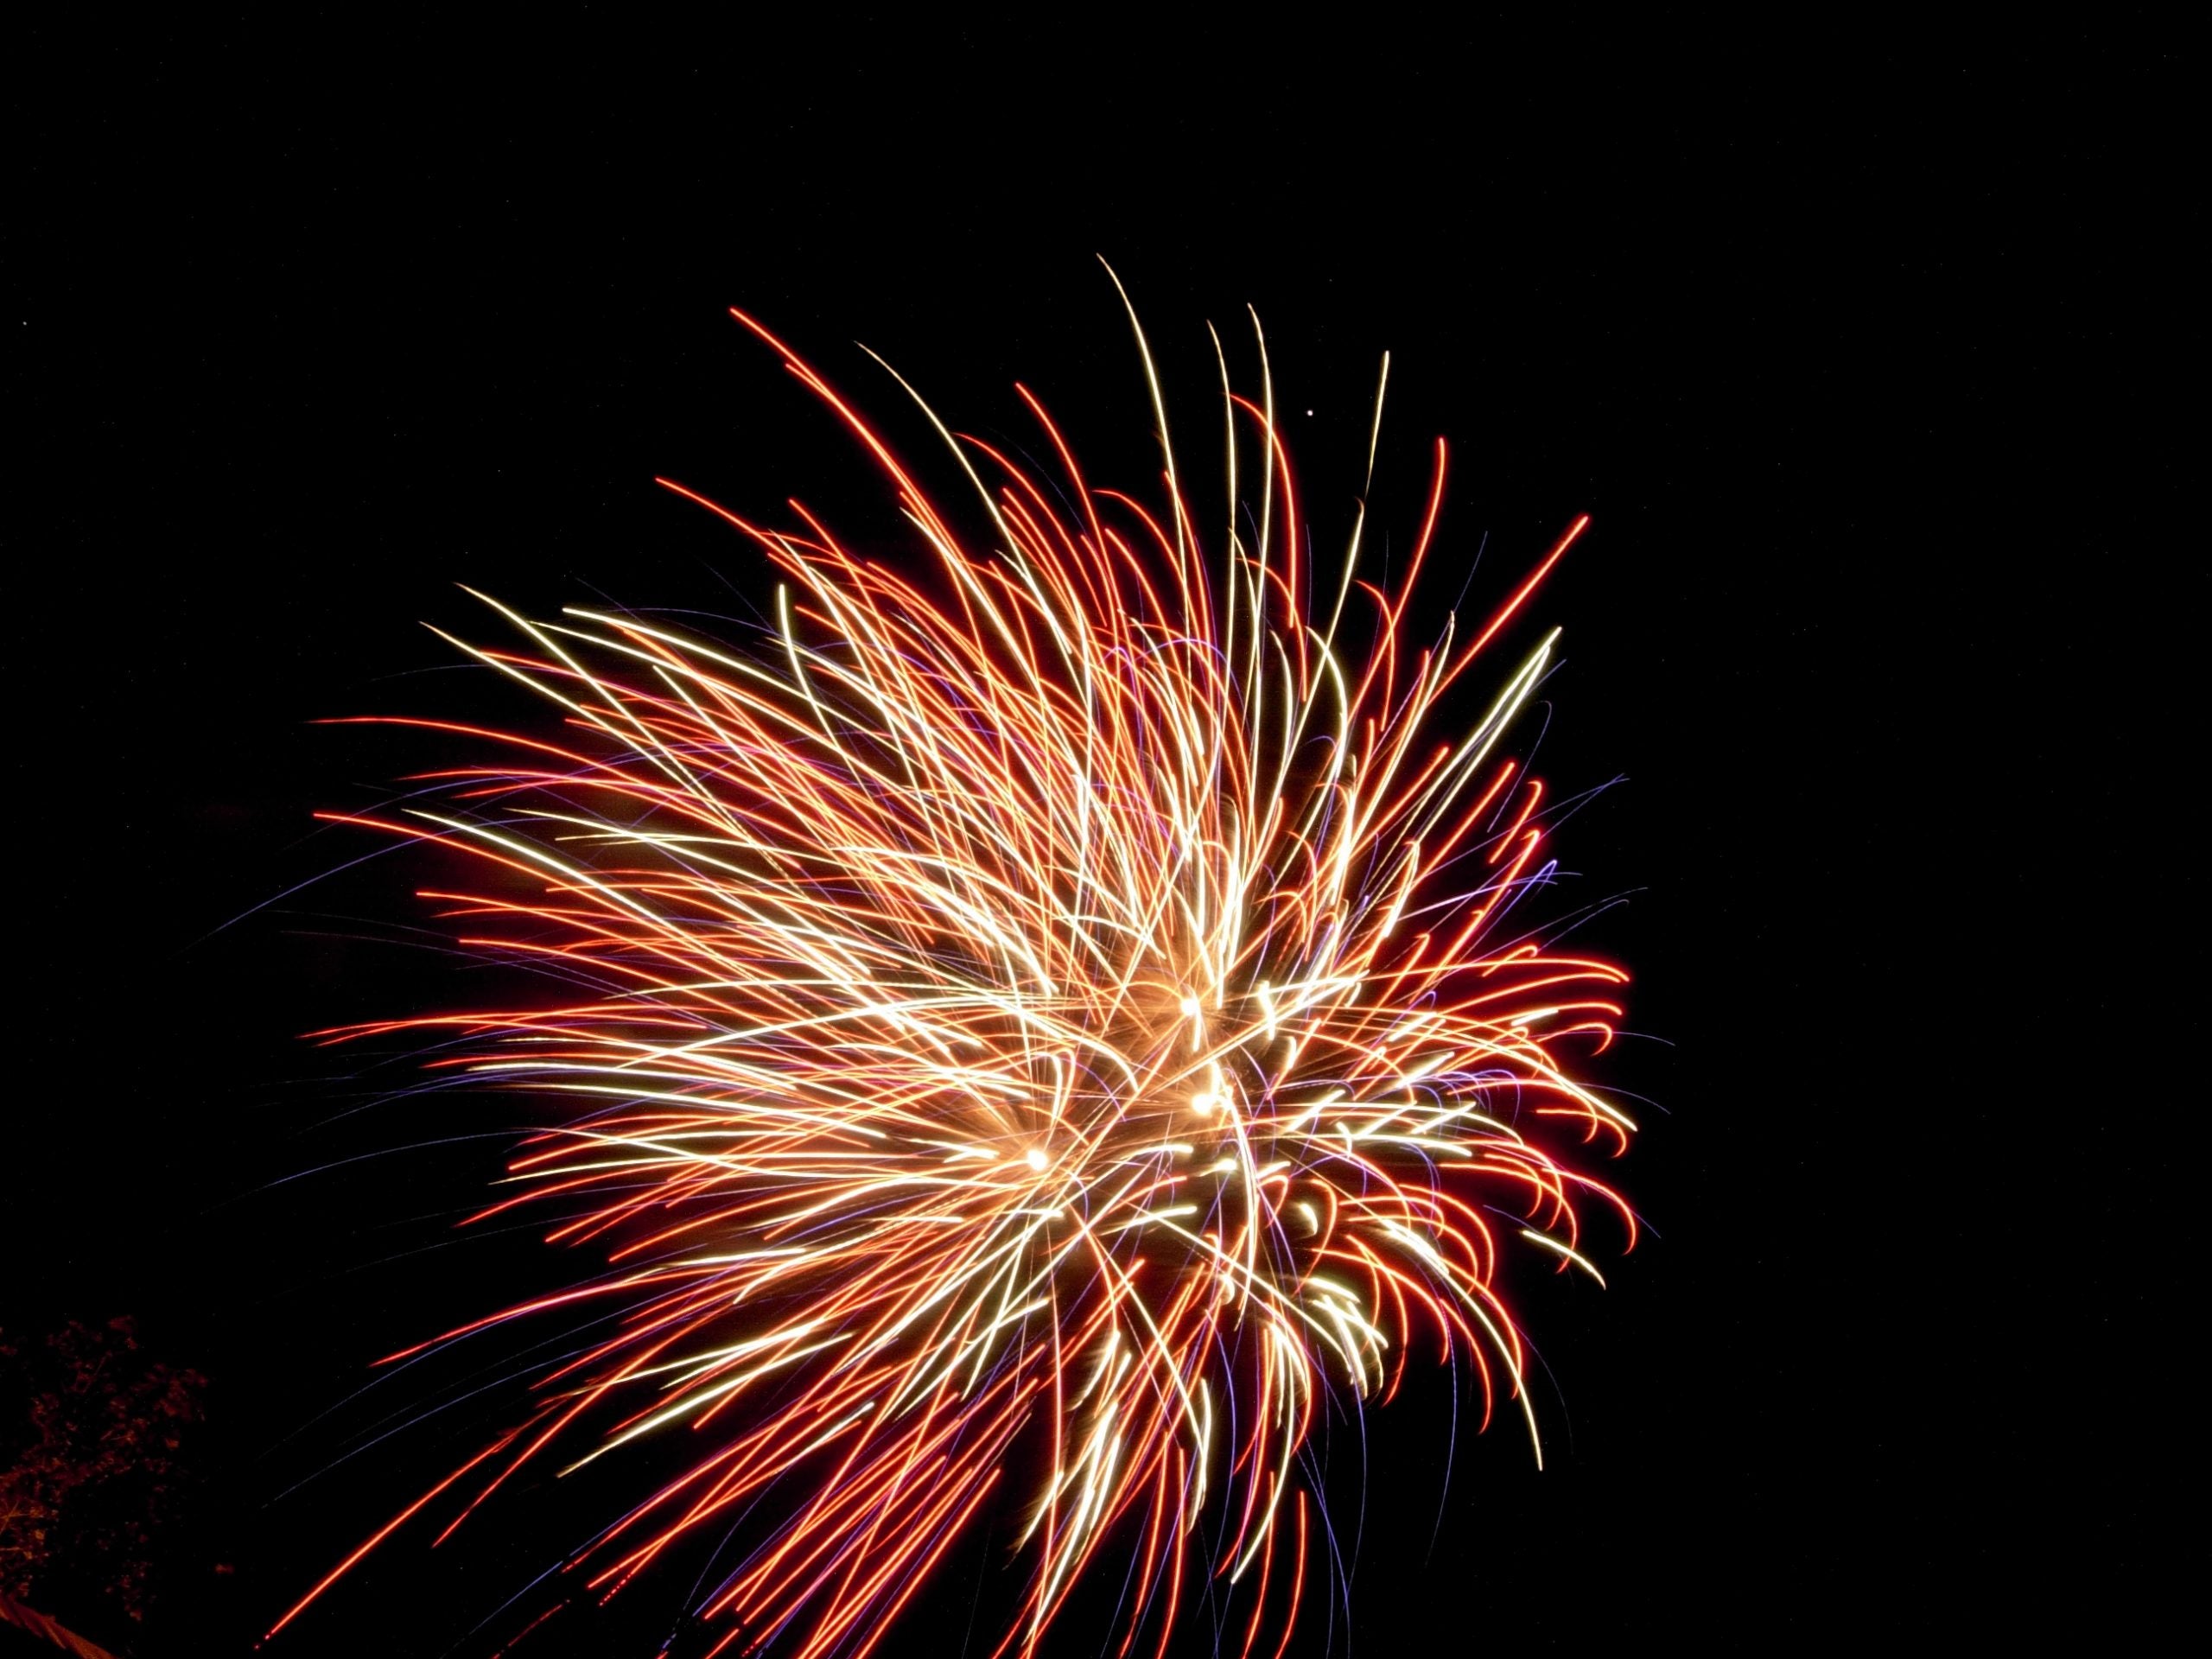 A long exposure photograph of fireworks in the night sky